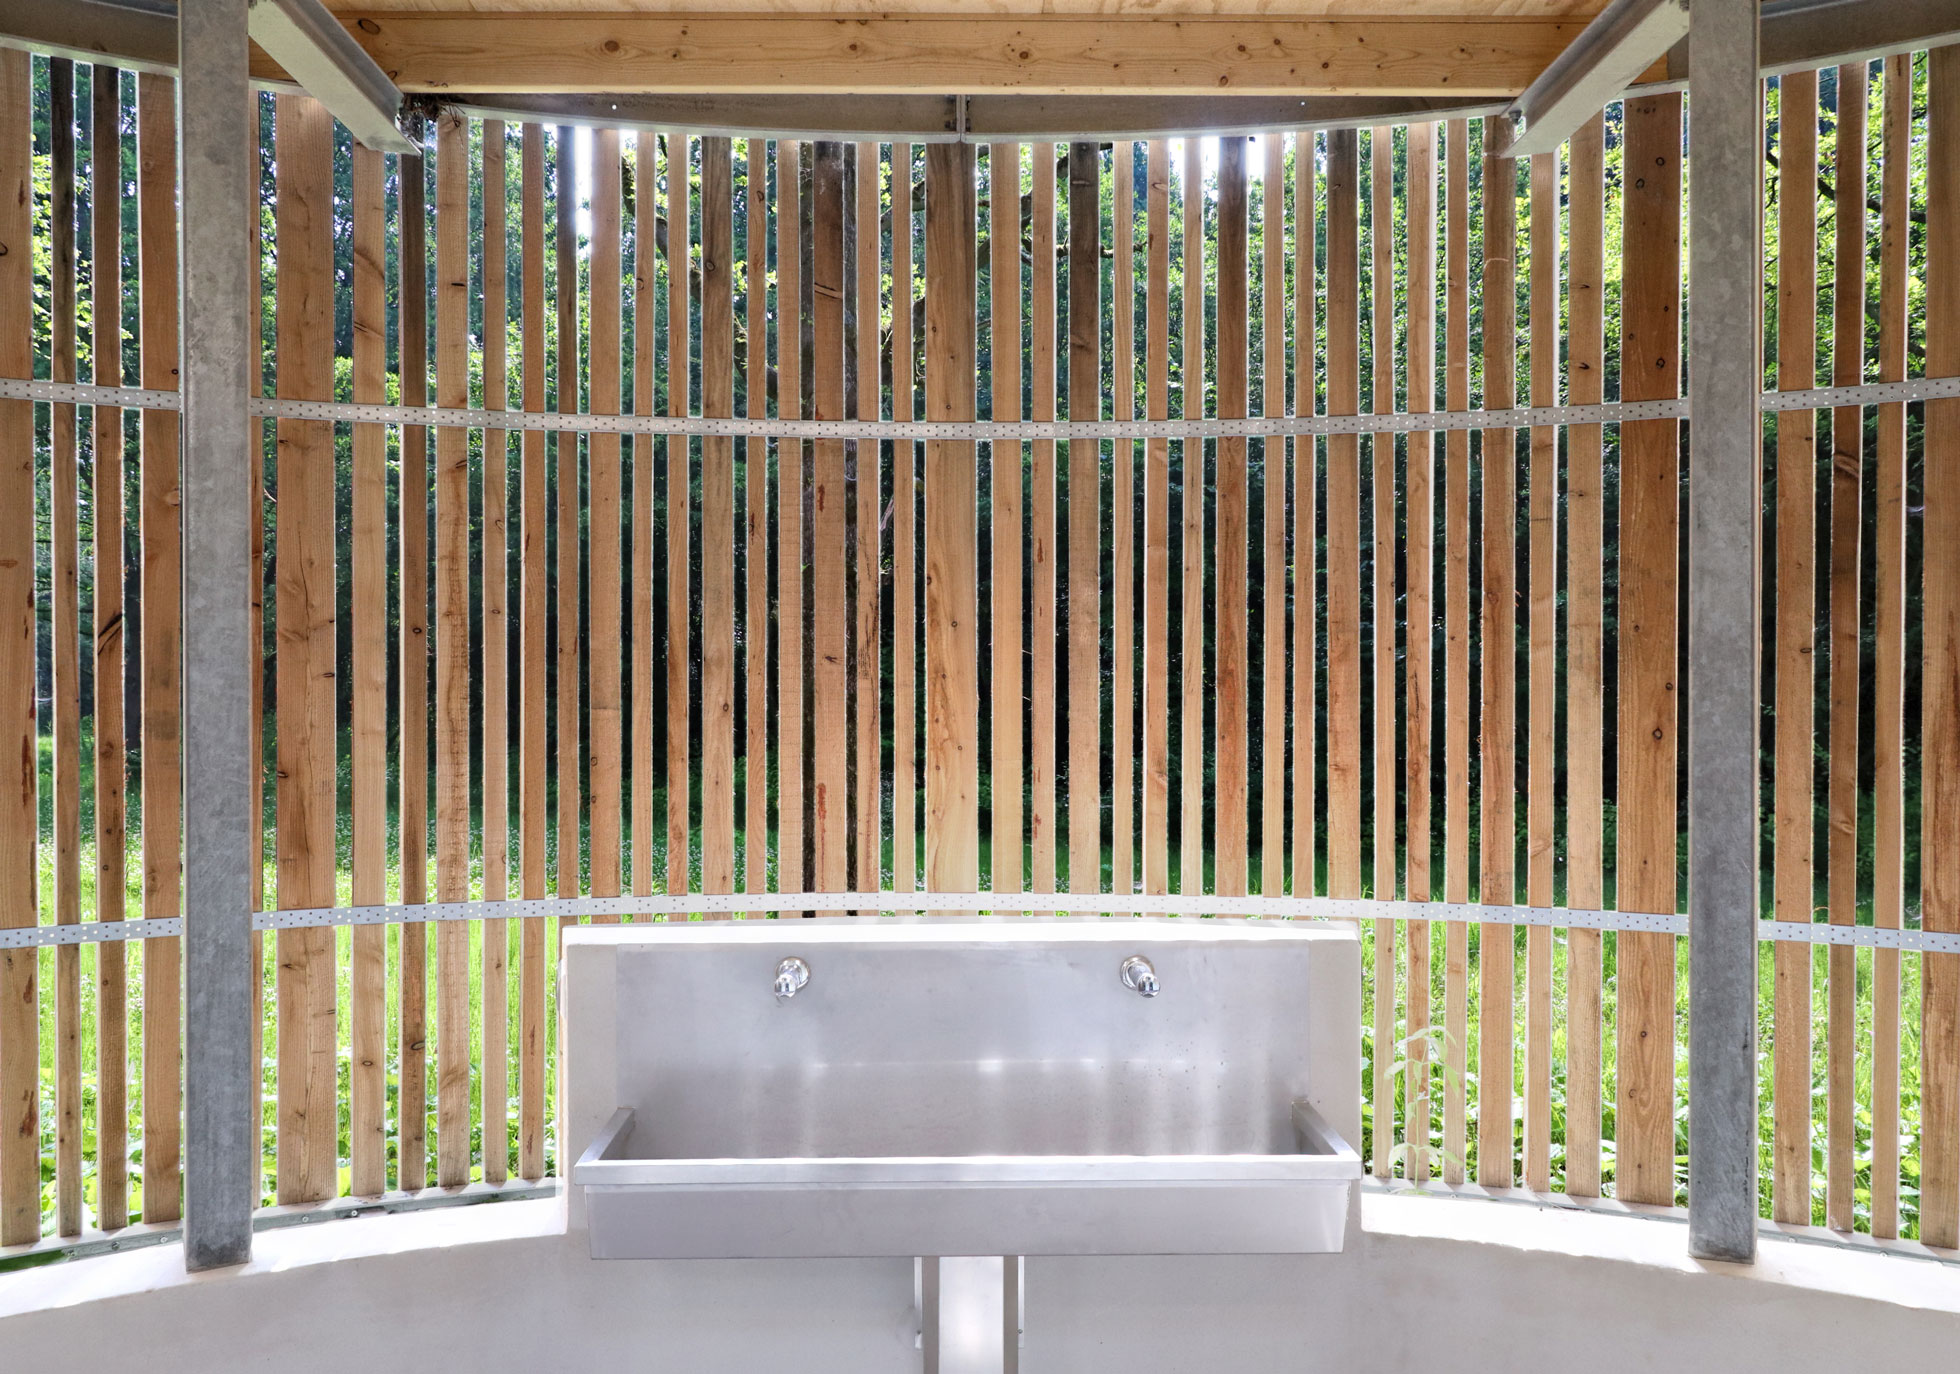 Interior view on the forest landscape through half open wooden façade, sunlight through wooden skin providing makes a sustainable and eco friendly solution. Metal sink offers view on green surrounding and air blows through for natural ventilation on the International Scout Centre in Zeewolde. The sanitary pavilions are designed and built by MOST Architecture,Rotterdam